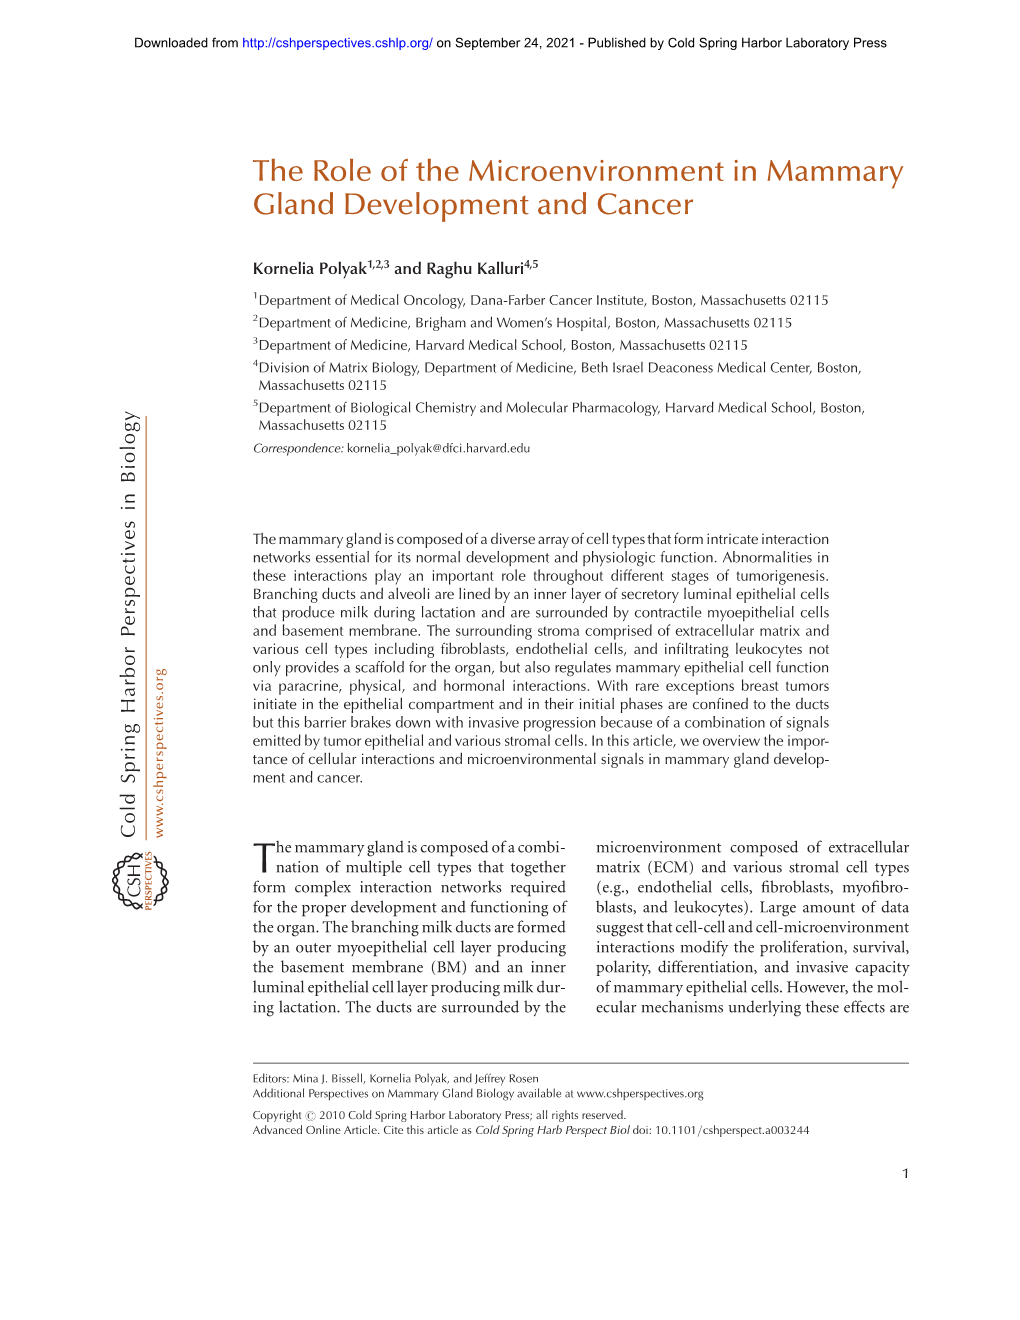 The Role of the Microenvironment in Mammary Gland Development and Cancer